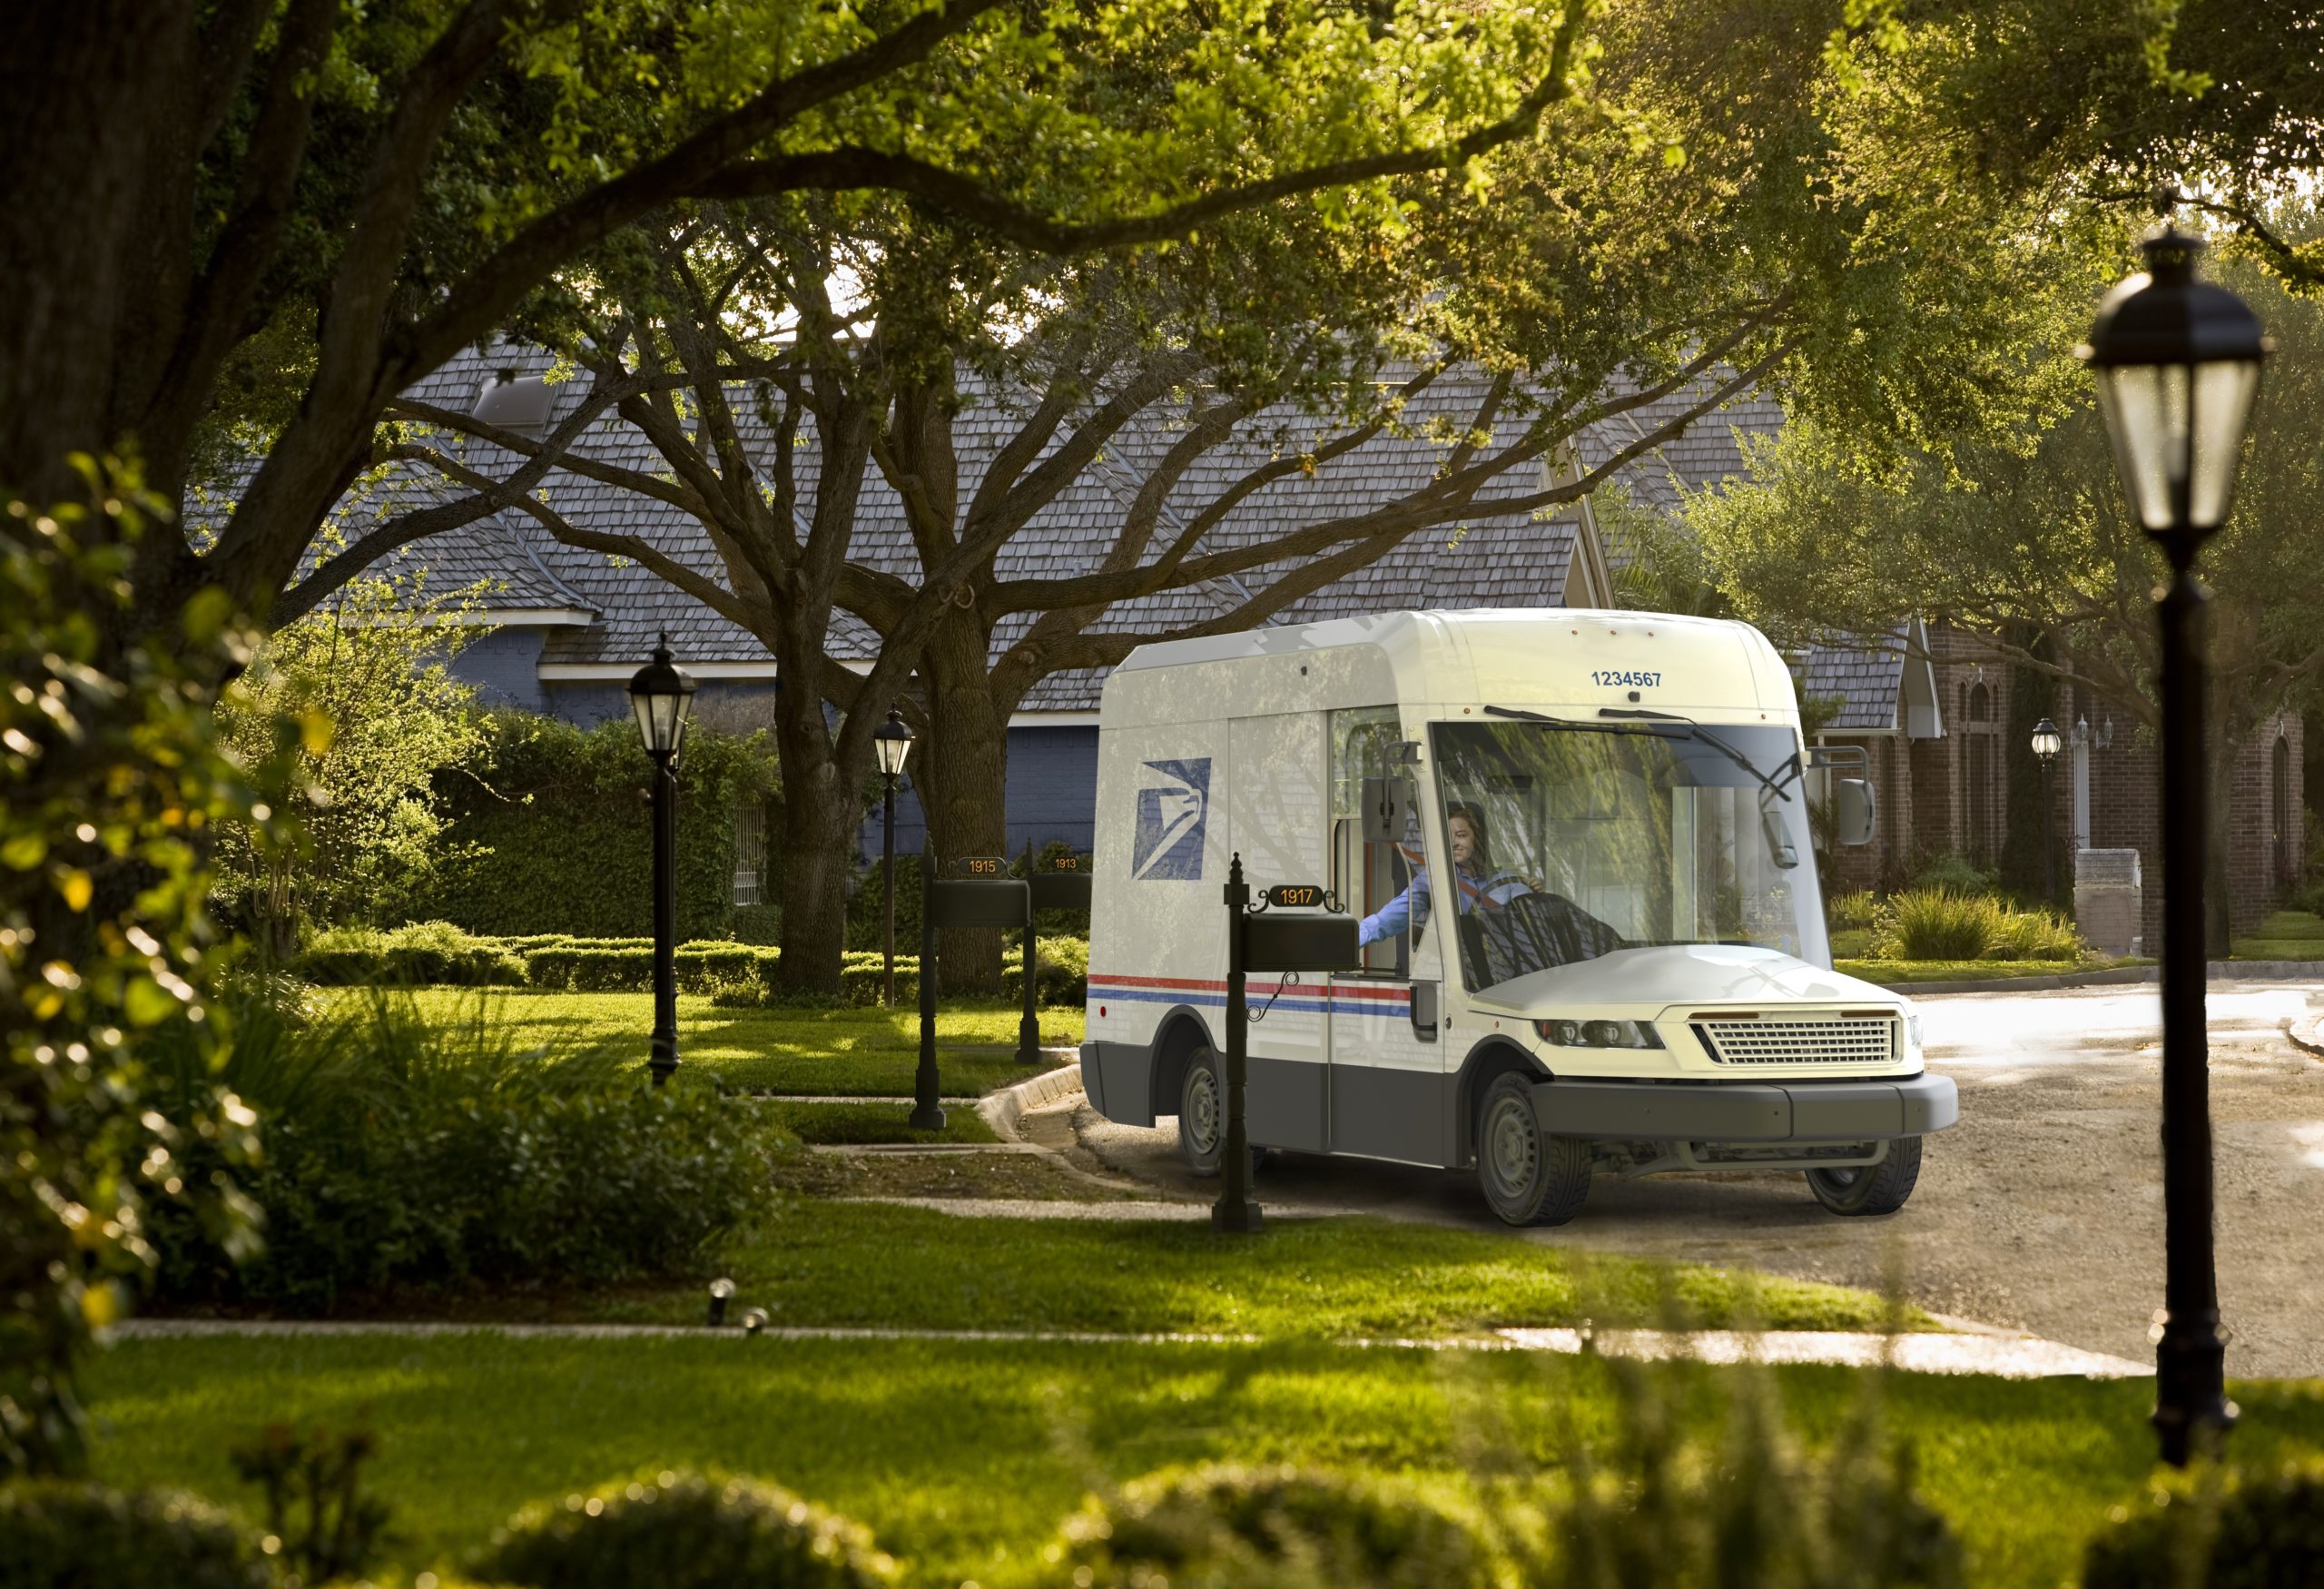 A futuristic mail truck at the end of a wooded street, with a postal worker leaning out the window to reach a mailbox